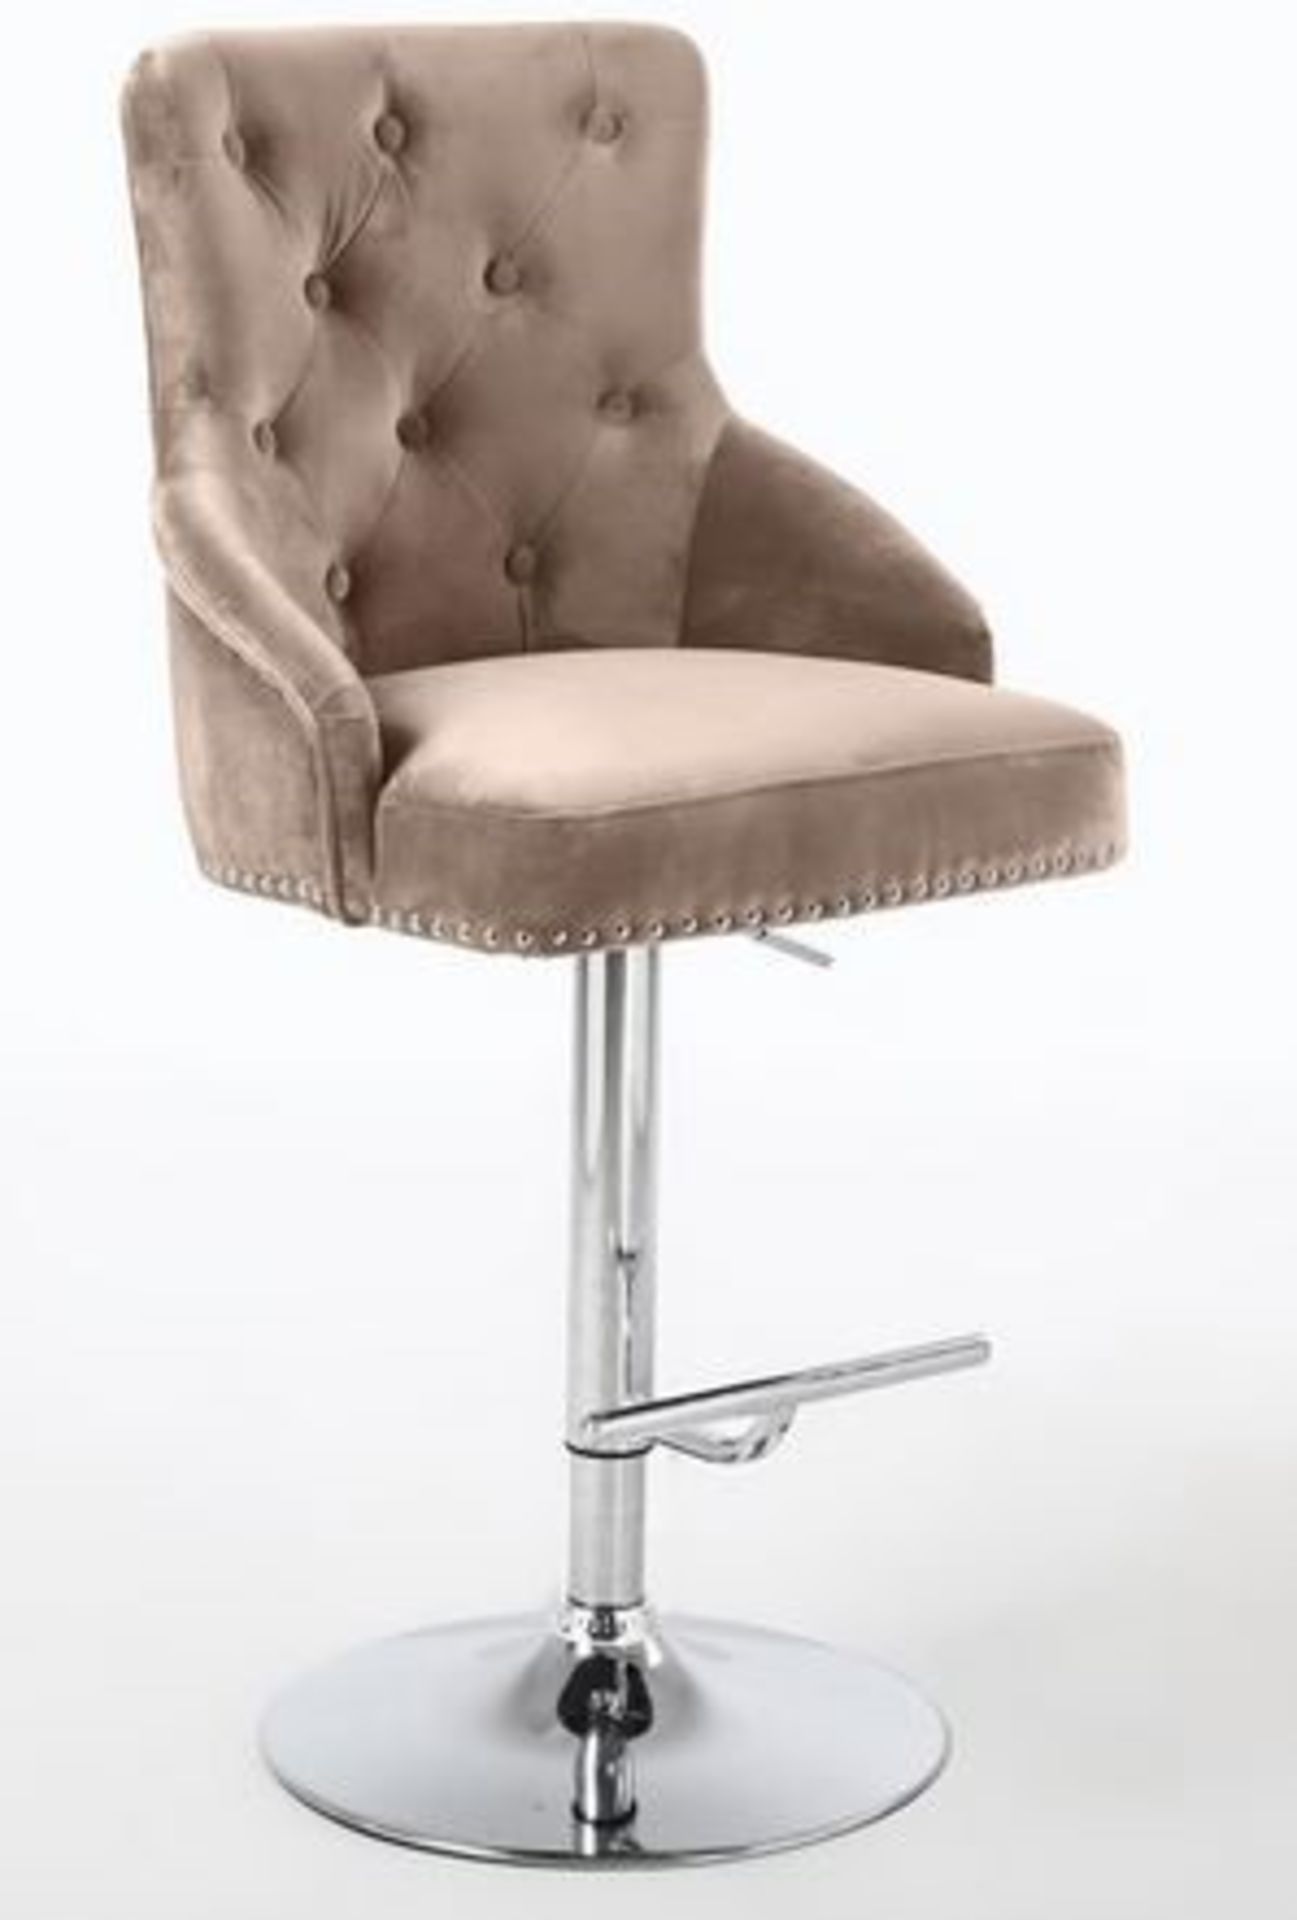 1 BOXED BRUSHED VELVET ADJUSTABLE LUXURY BAR STOOL WITH STUD DETAIL AND PIPING - MINK / RRP £127.